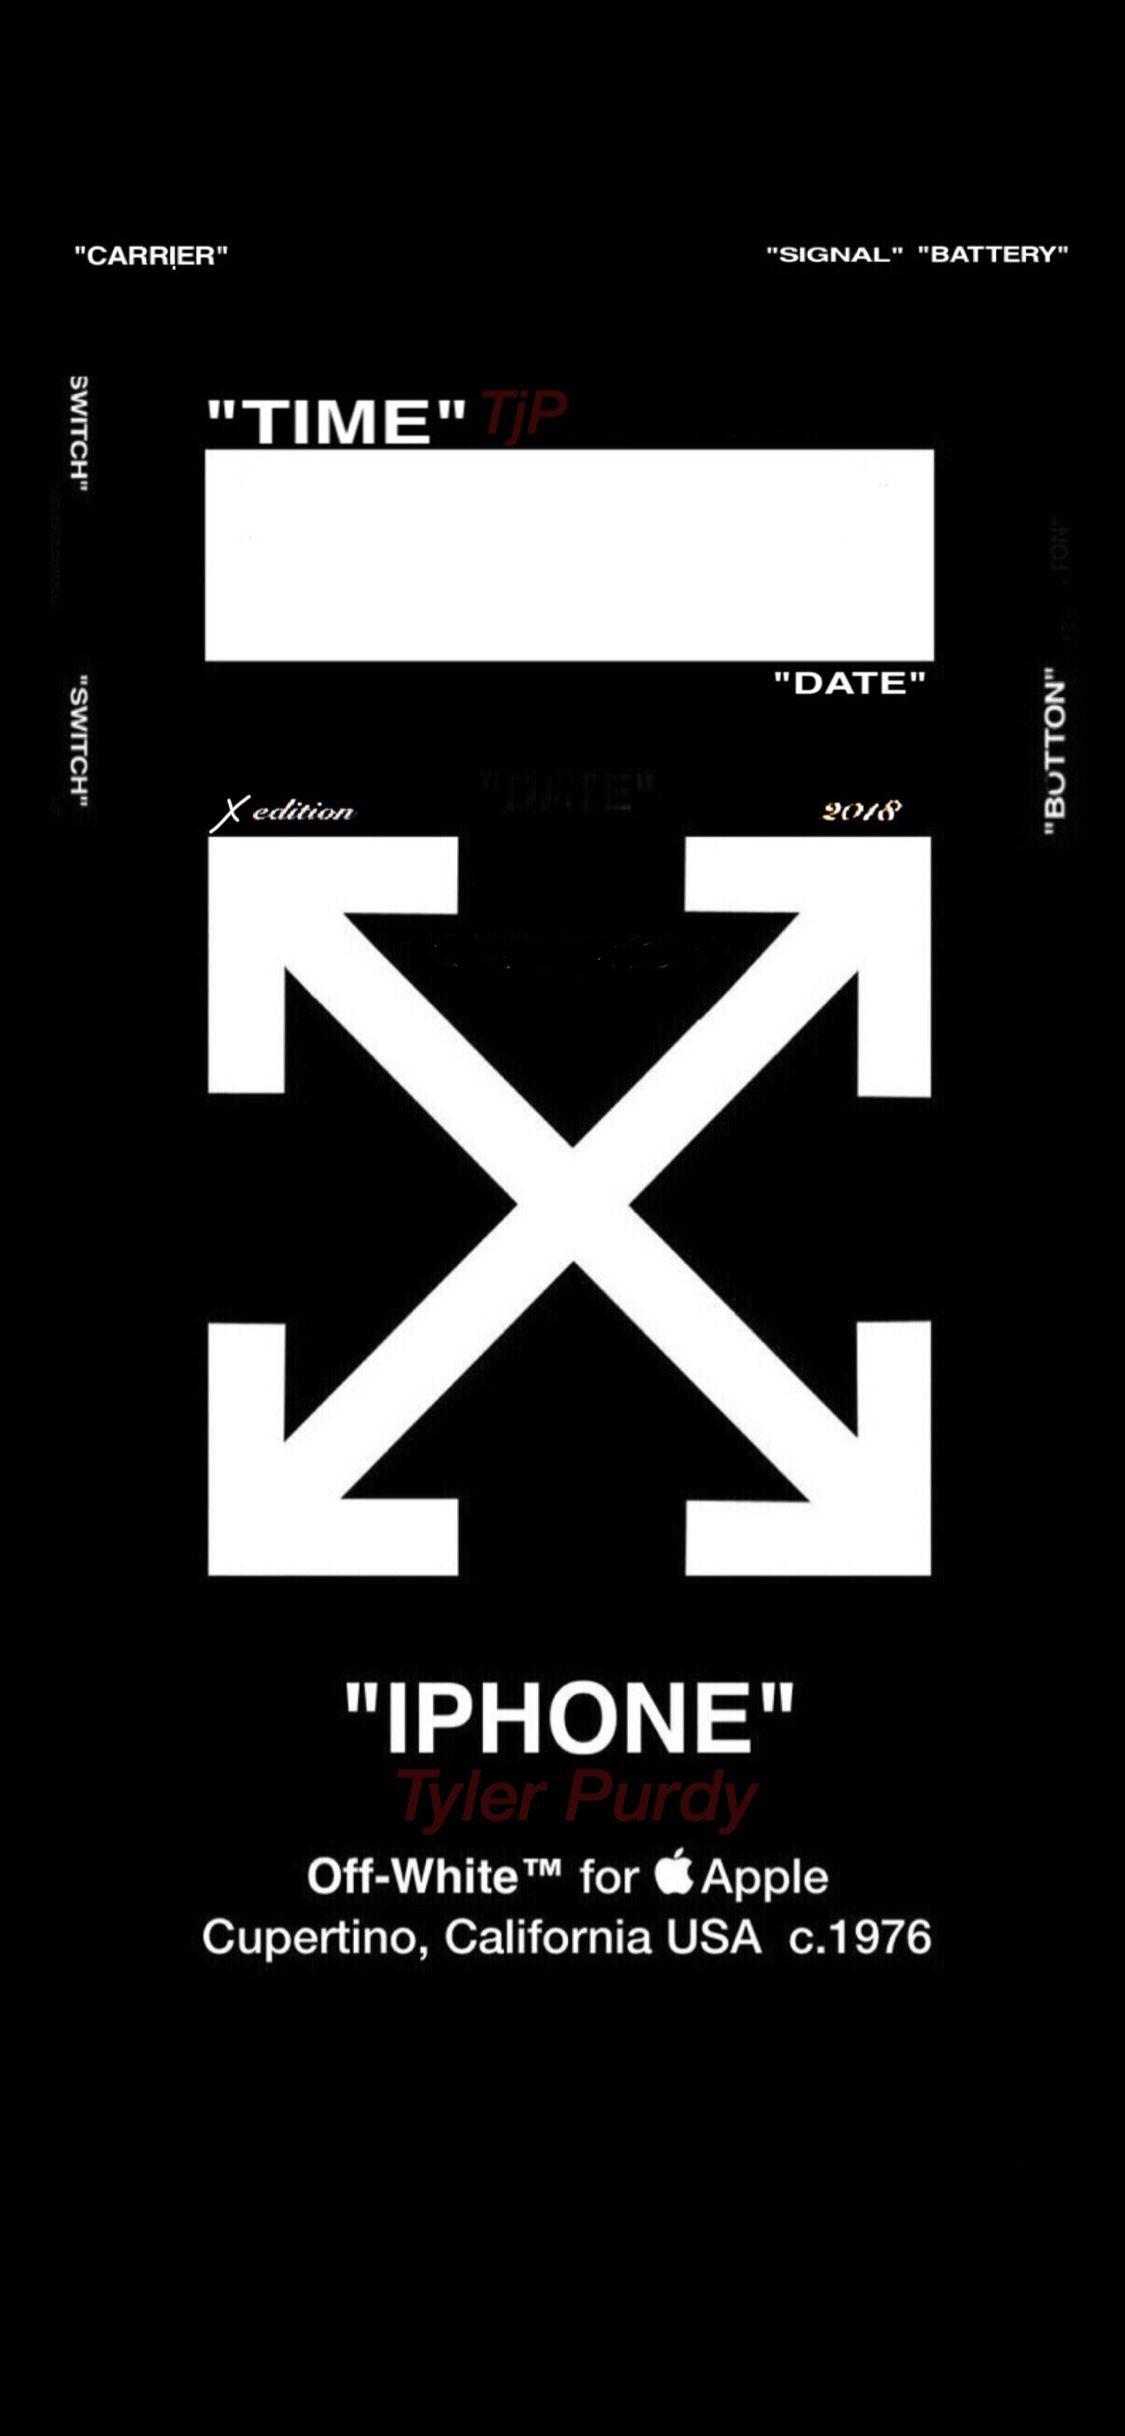 IPhone wallpaper off white x apple - Off-White